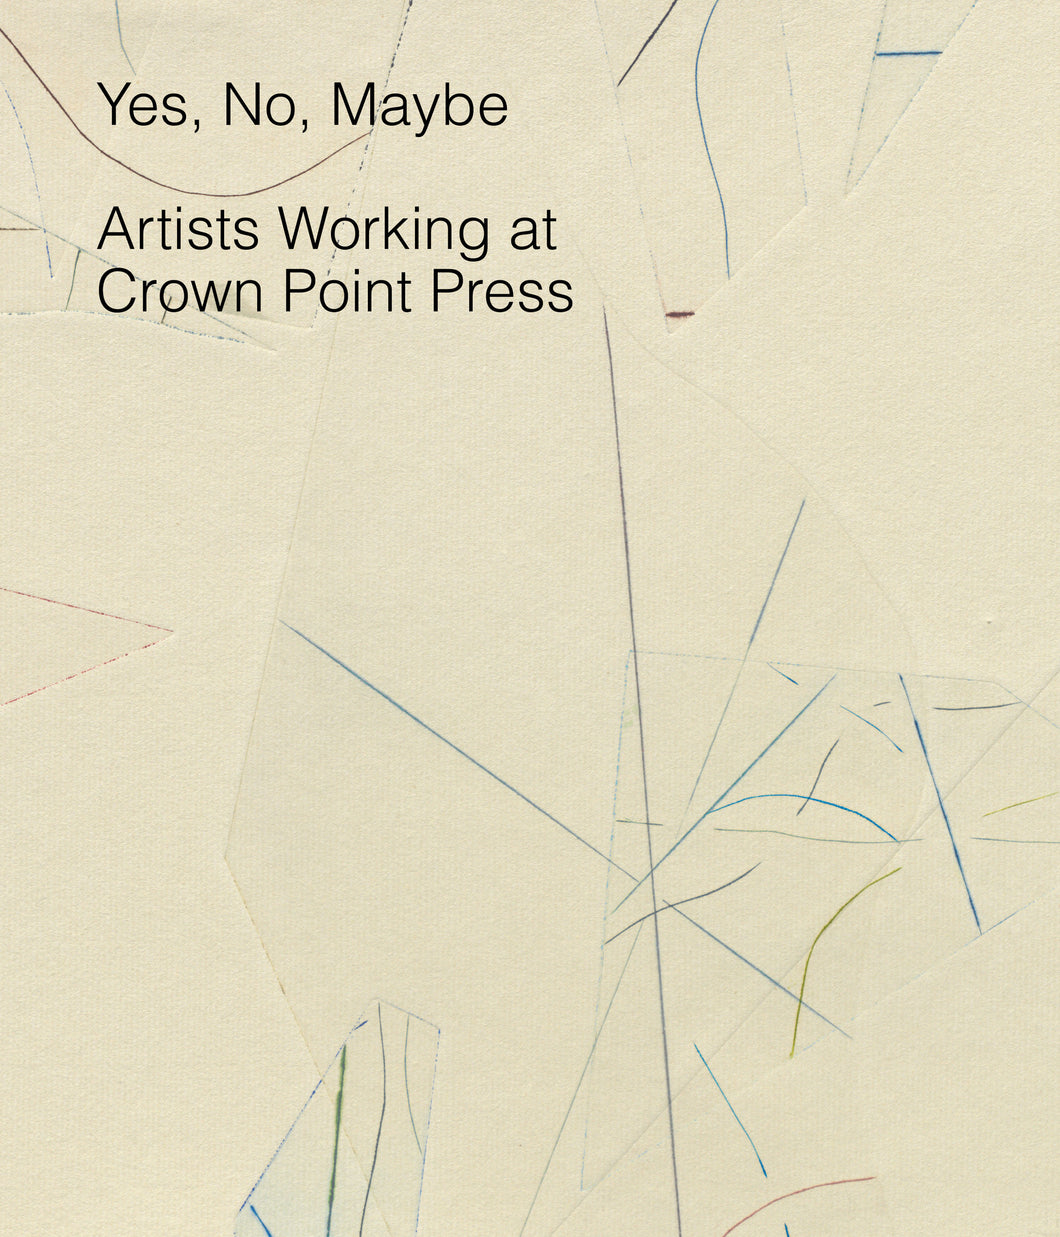 Yes, No, Maybe: Artists Working at Crown Point Press